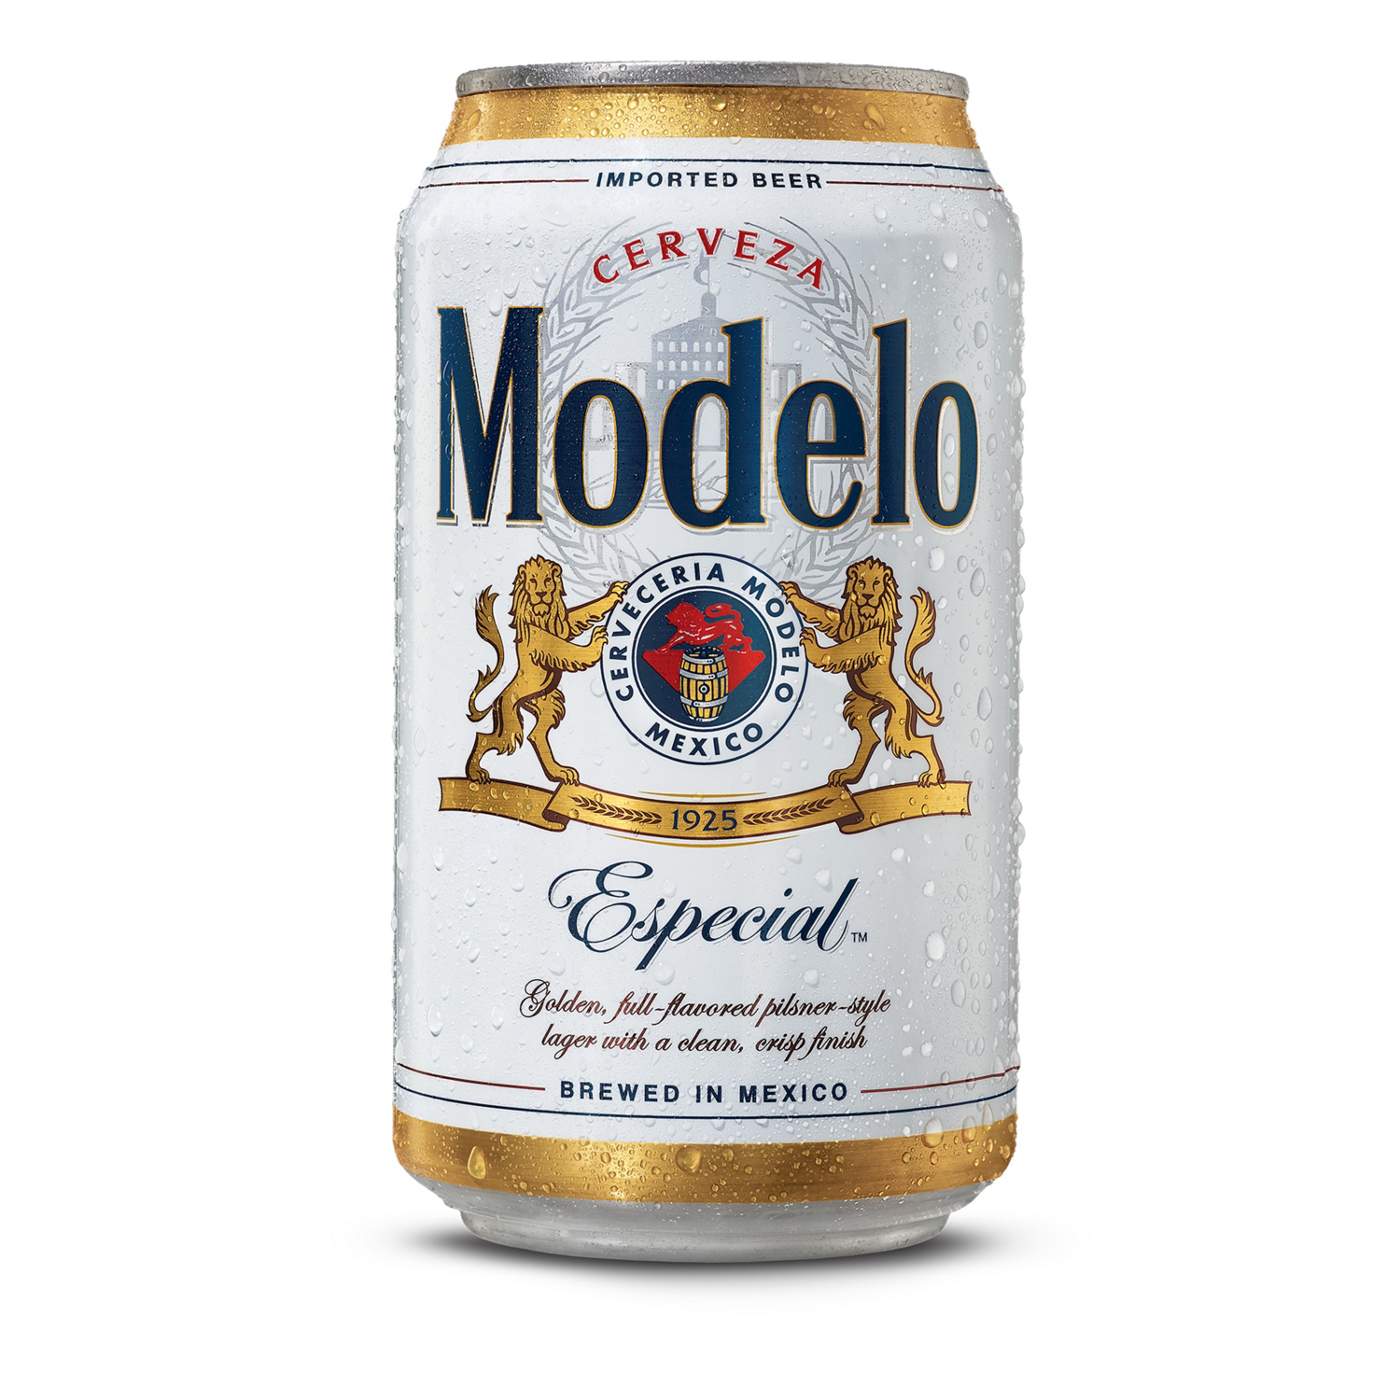 Modelo Especial Mexican Lager Import Beer 12 oz Cans, 6 pk; image 5 of 11